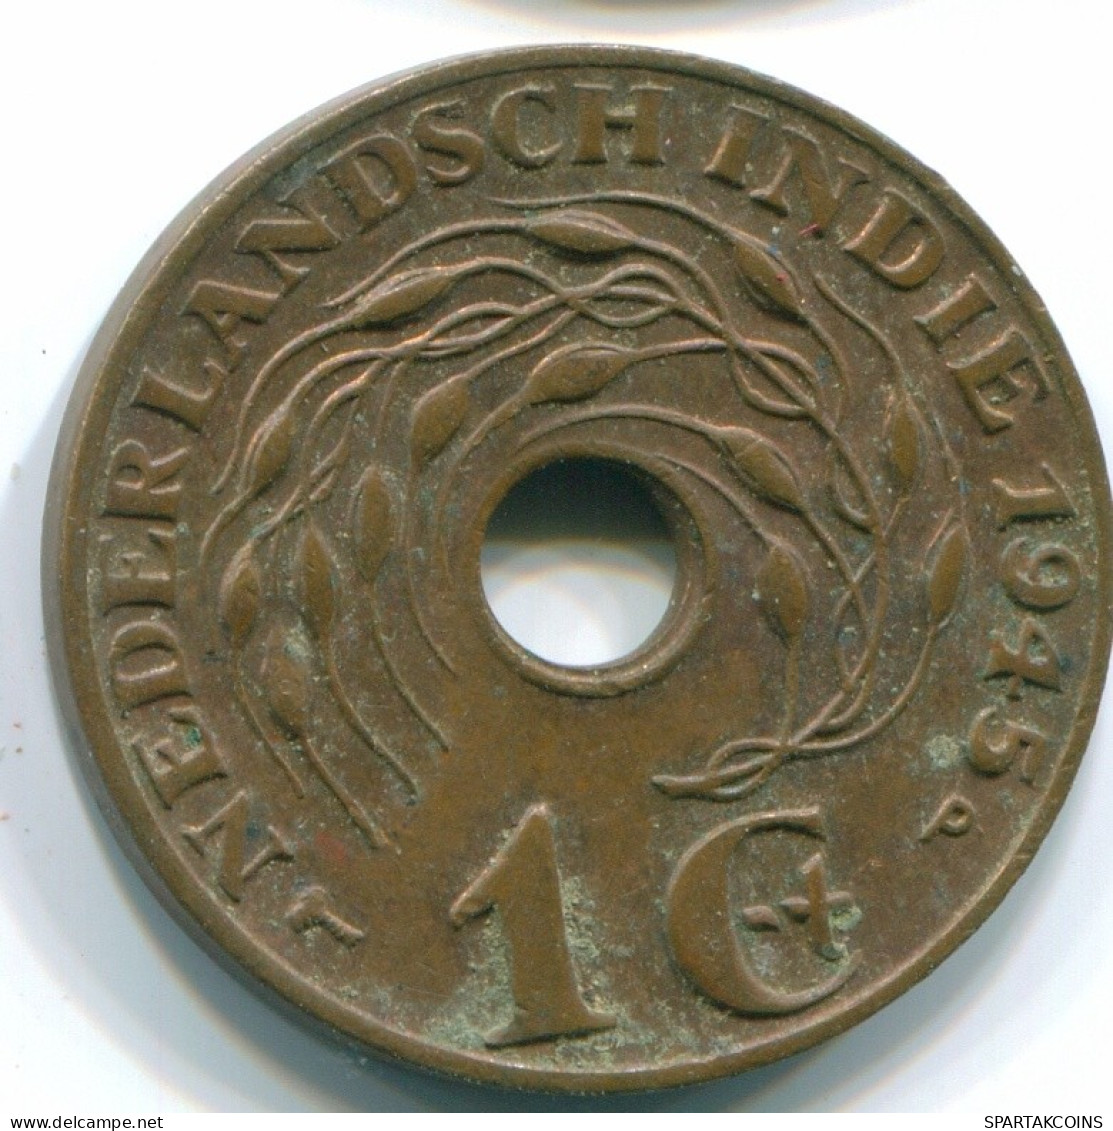 1 CENT 1945 P NETHERLANDS EAST INDIES INDONESIA Bronze Colonial Coin #S10343.U.A - Indes Neerlandesas